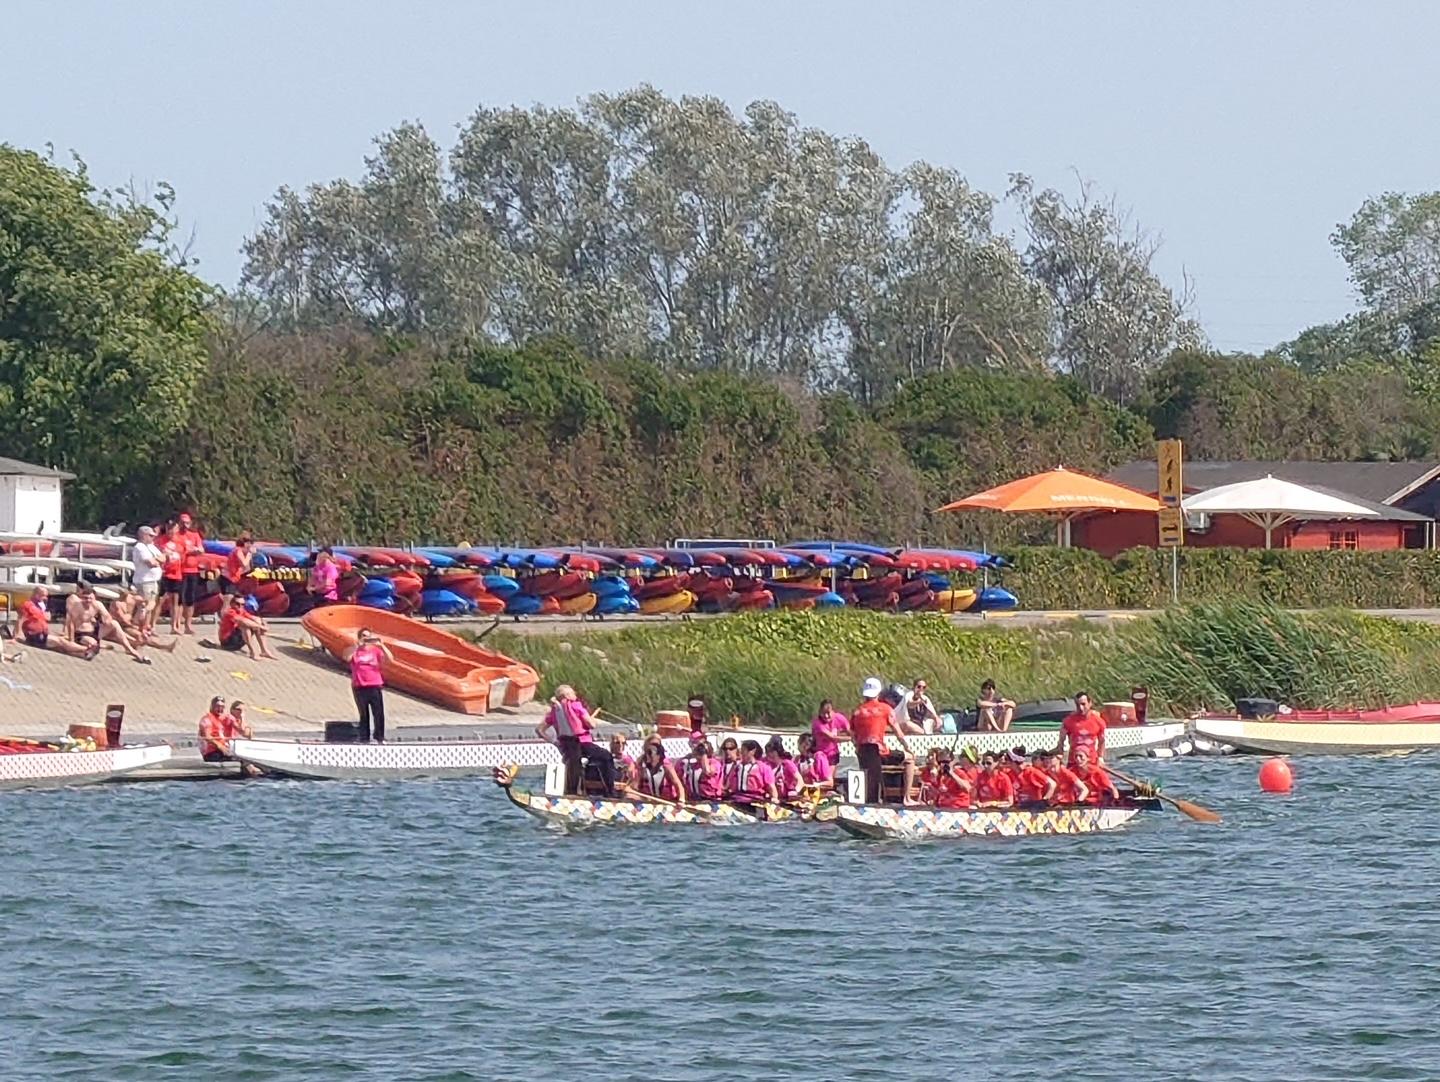 The 3rd Barcelona Hong Kong International Dragon Boat Festival (the Festival) was held on May 21-22(Barcelona Time) in Castelldefels, Barcelona in Spain. Photo shows boats racing at the Barcelona Hong Kong International Dragon Boat Festival. 